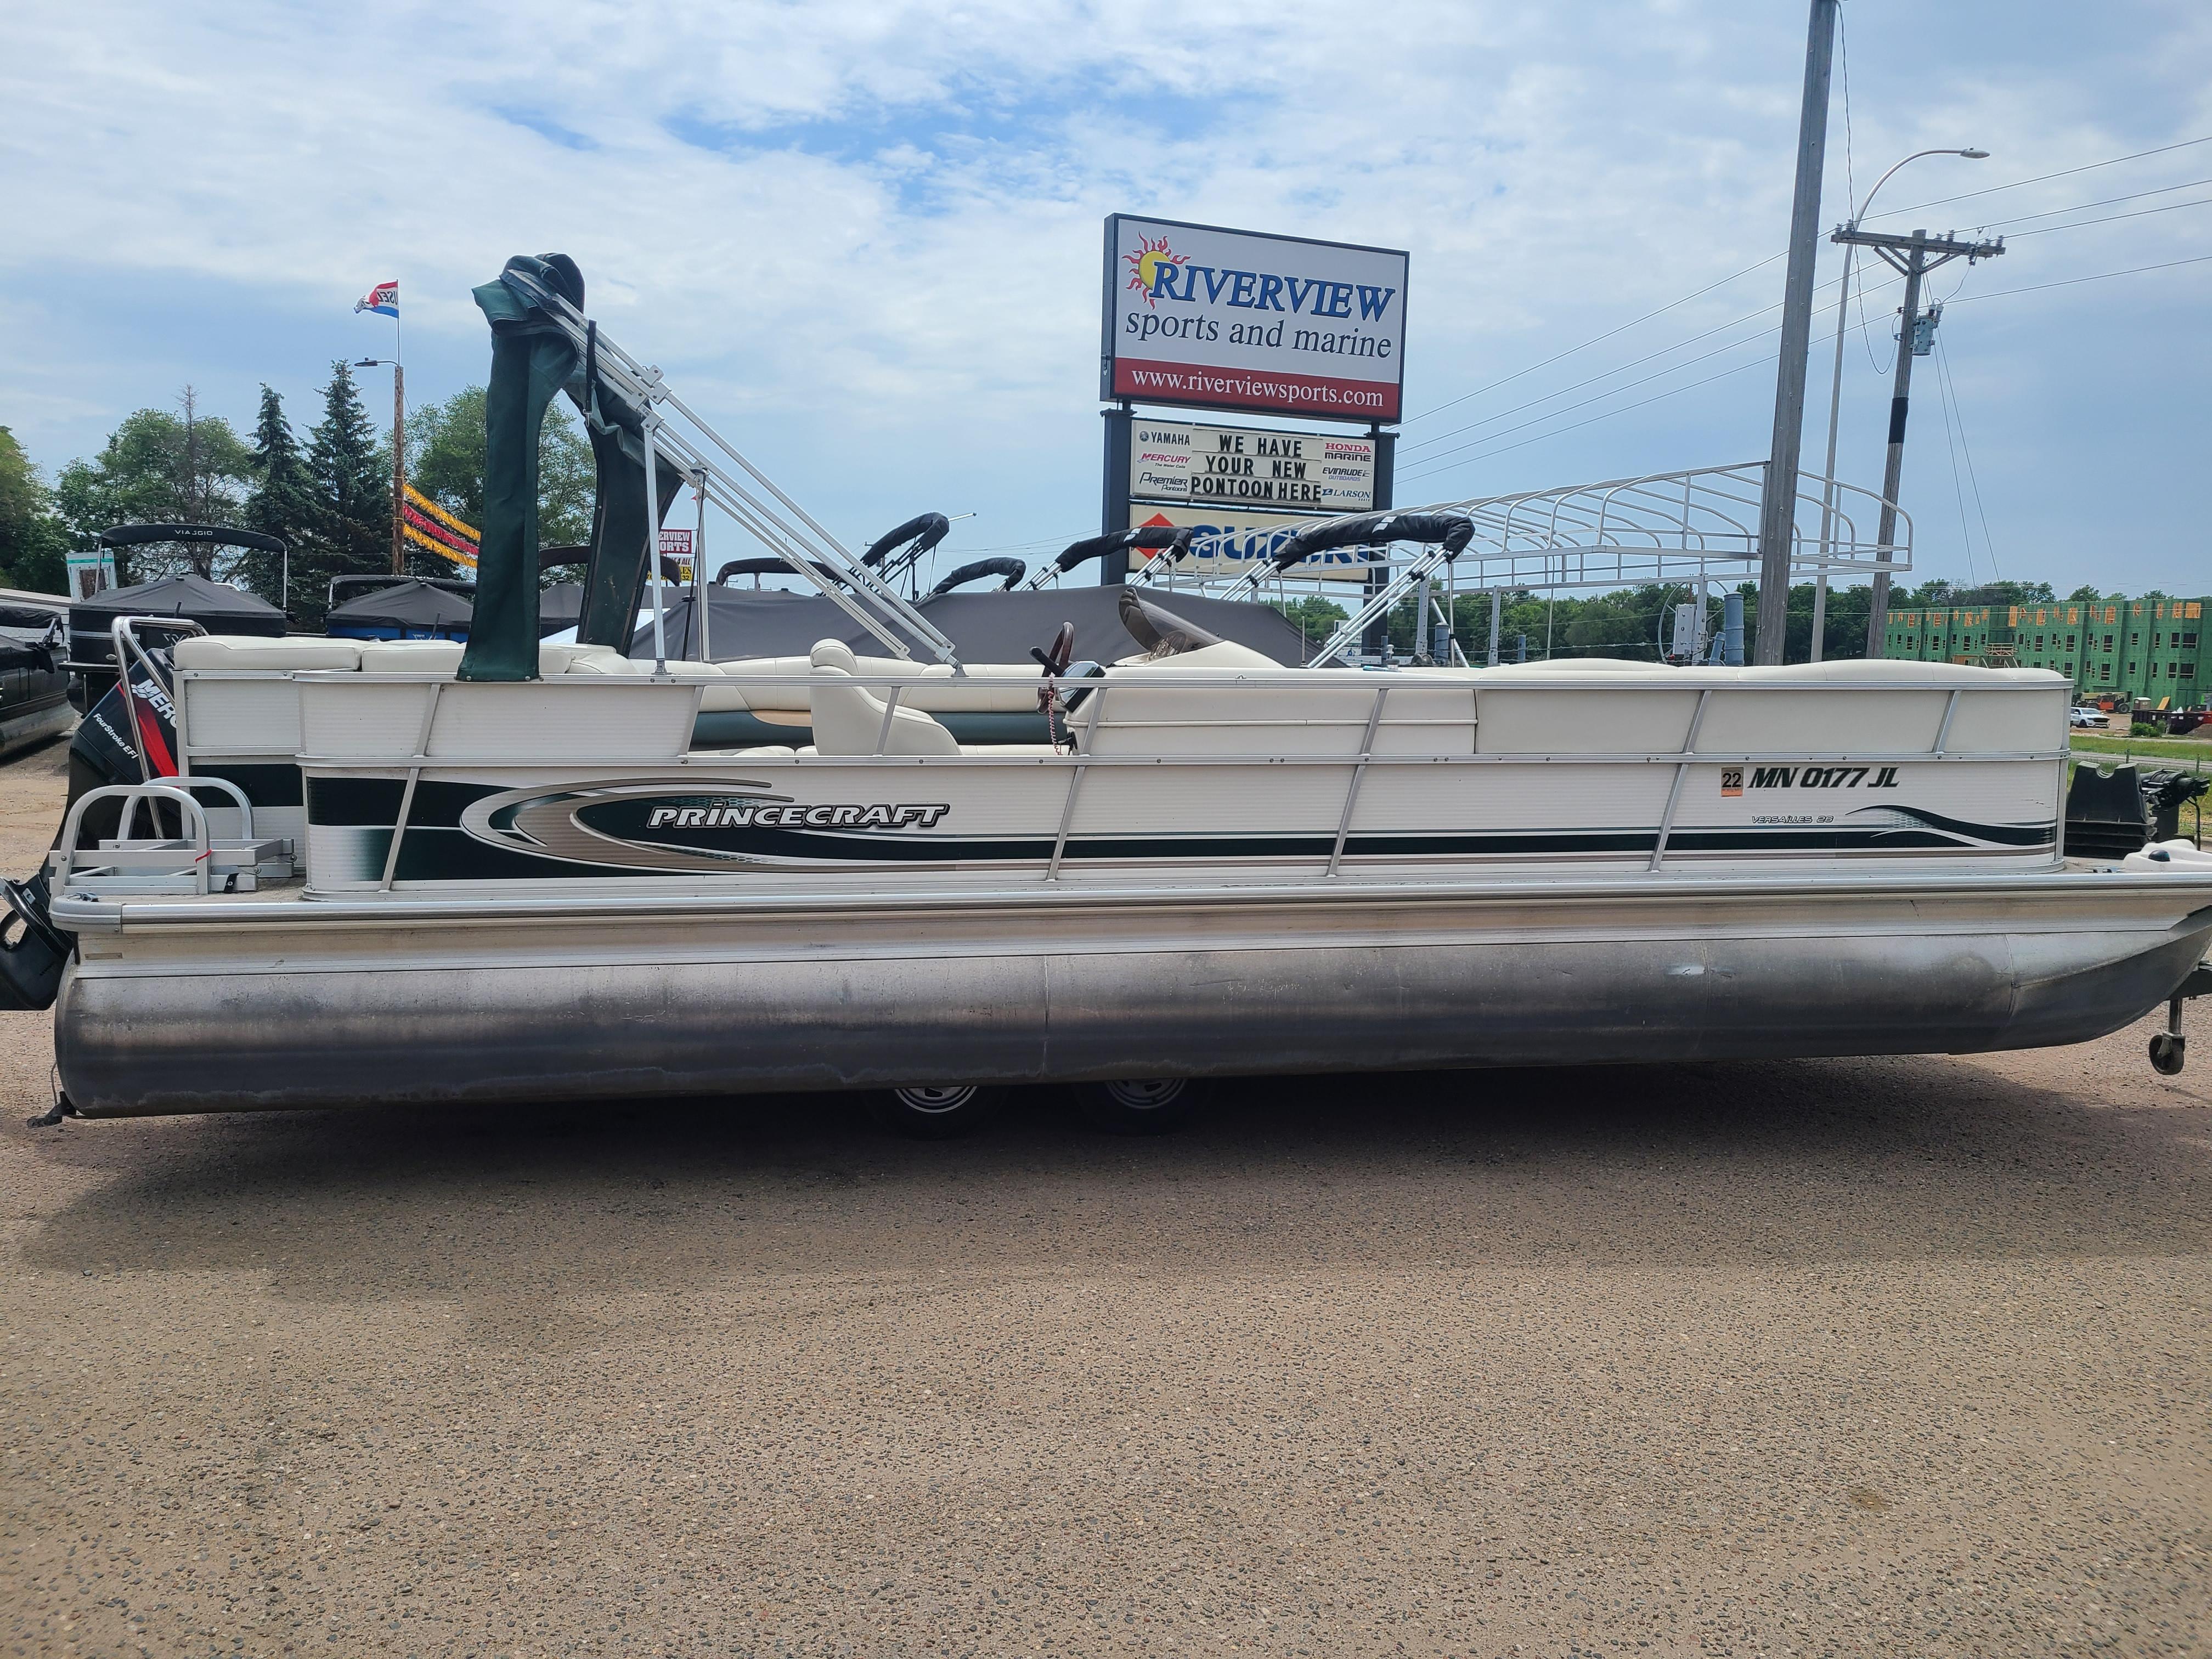 Fishing/Sport, Boats and Outboards in White Bear Lake, MN, Fishing Boats, Pontoon Boats, Outboard Motors